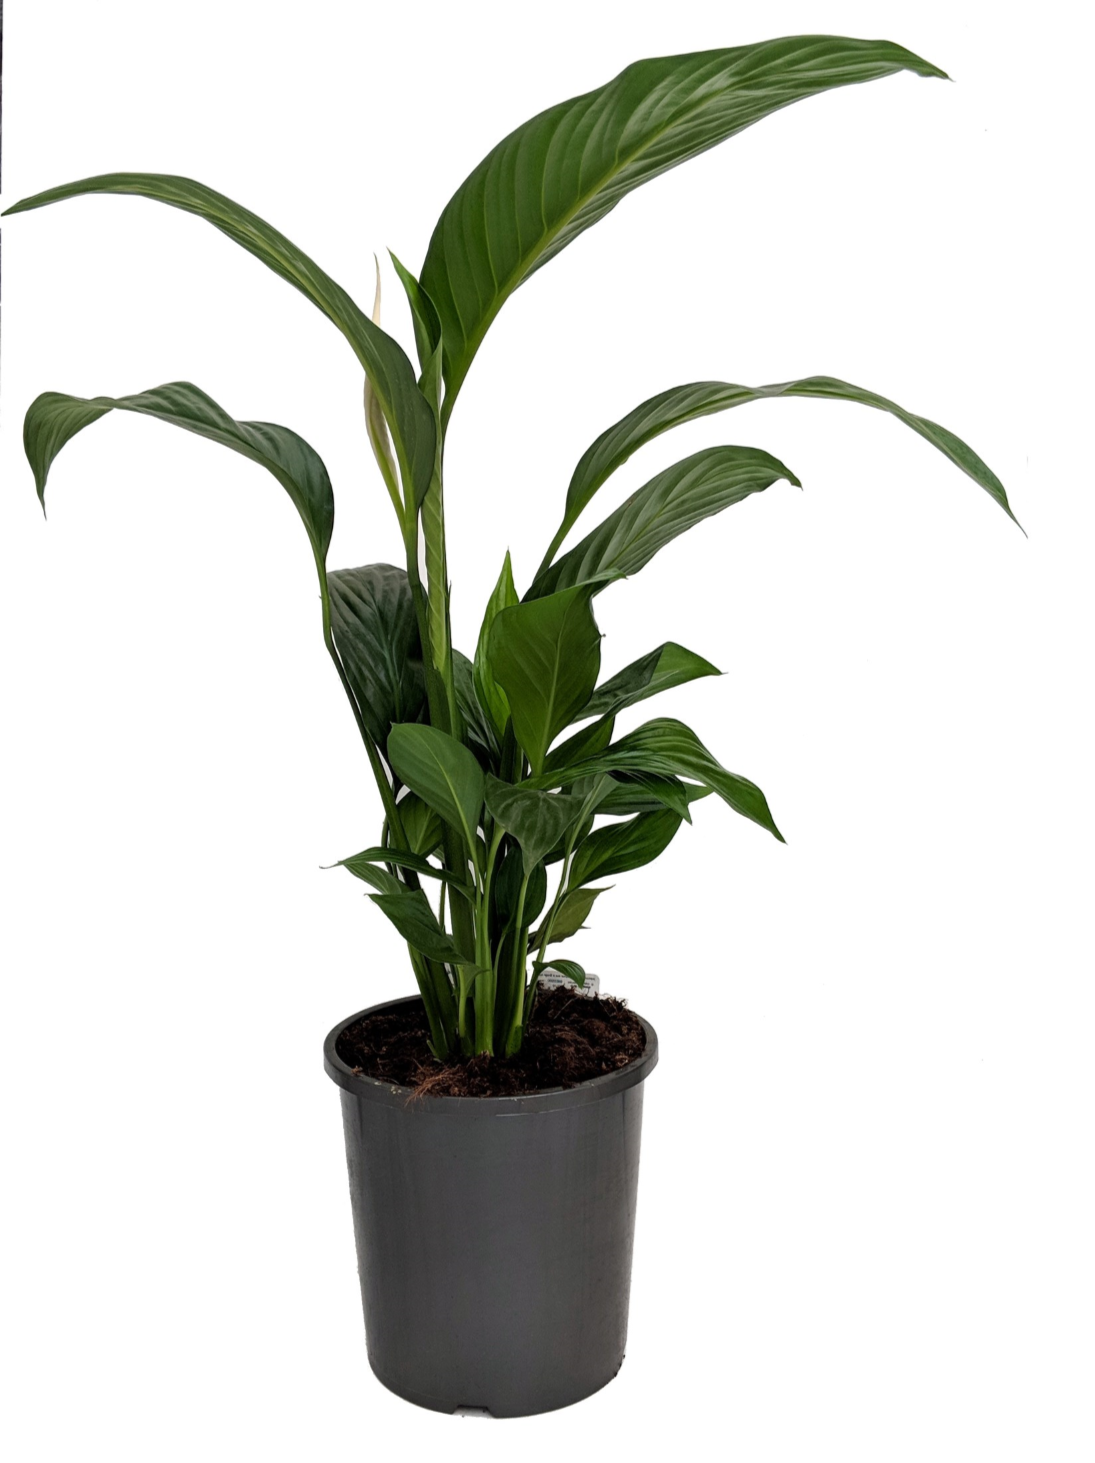 SPATHIPHYLLUM - PEACE LILY 130mm